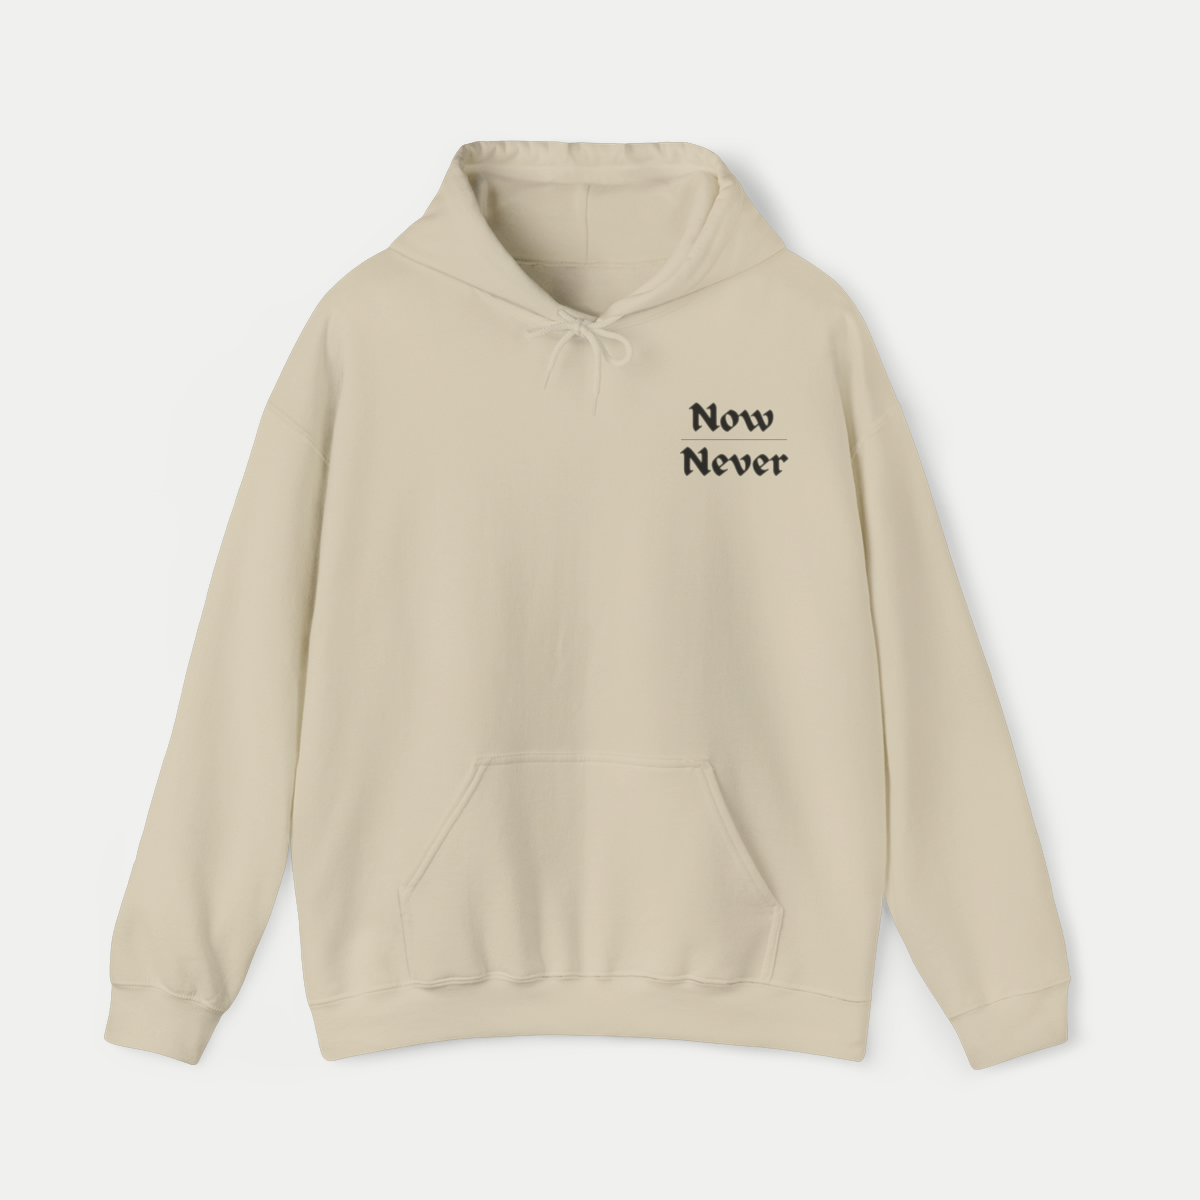 Motivation Inspired Now Over Never Hooded Sweatshirt Color Sand Front